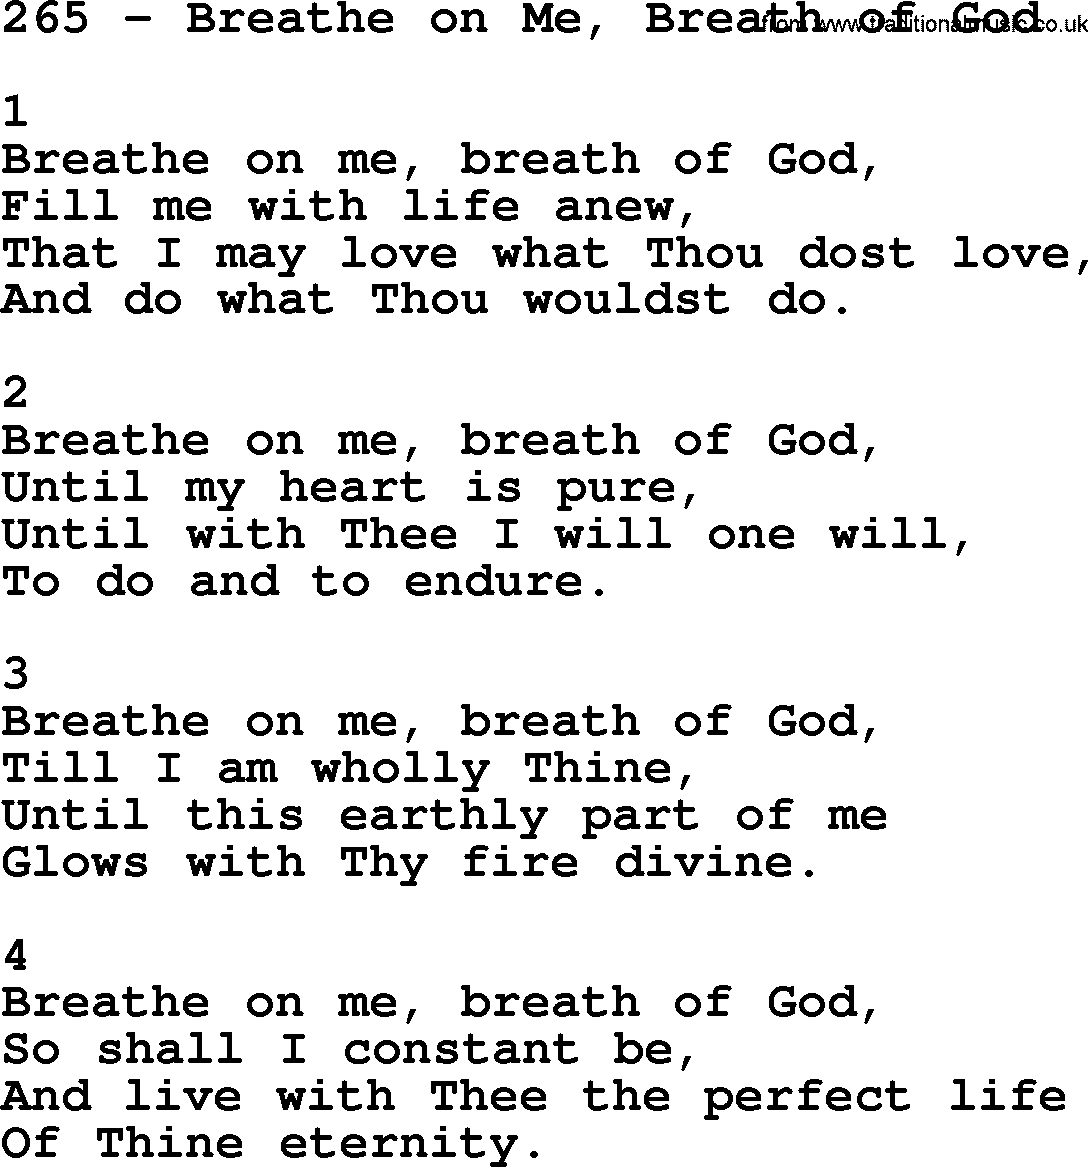 Complete Adventis Hymnal, title: 265-Breathe On Me, Breath Of God, with lyrics, midi, mp3, powerpoints(PPT) and PDF,